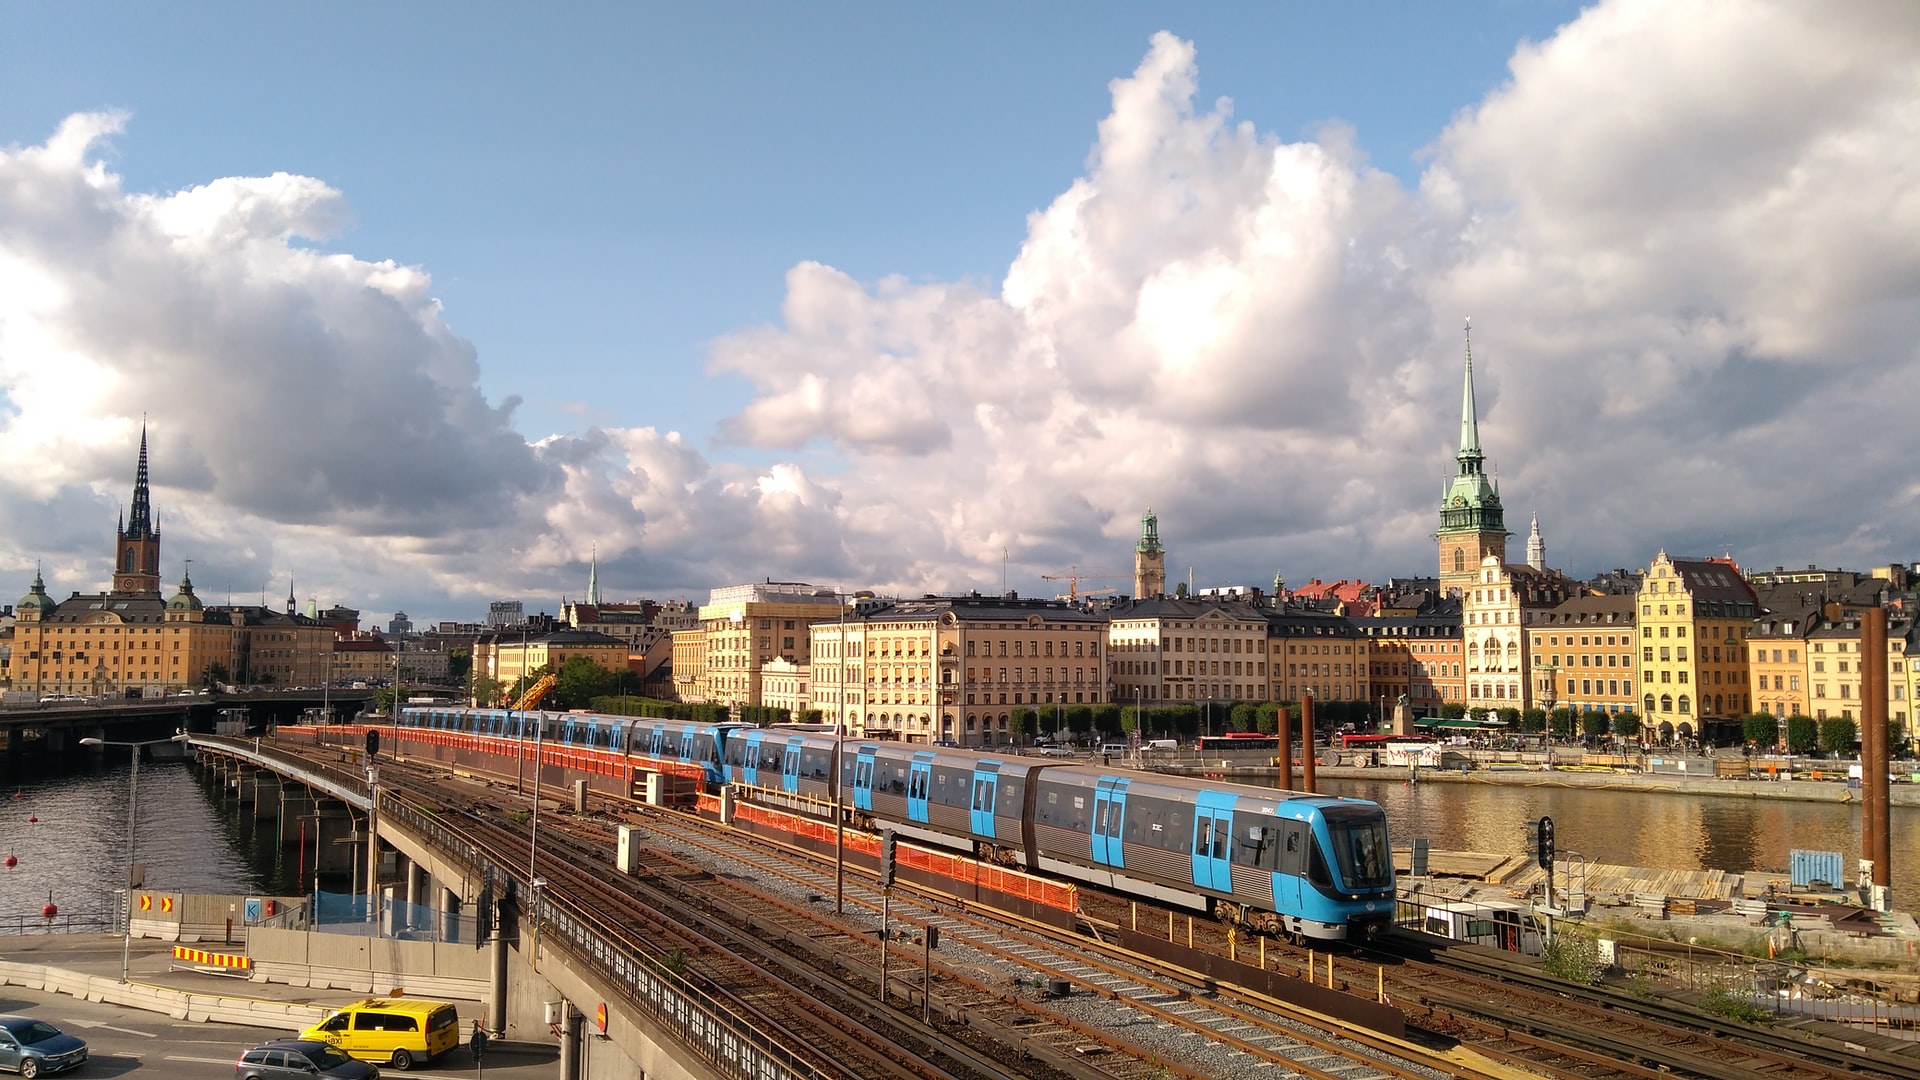 Swedish trains make it easy to take day trips from Stockholm. (photo: Alexis Mette)